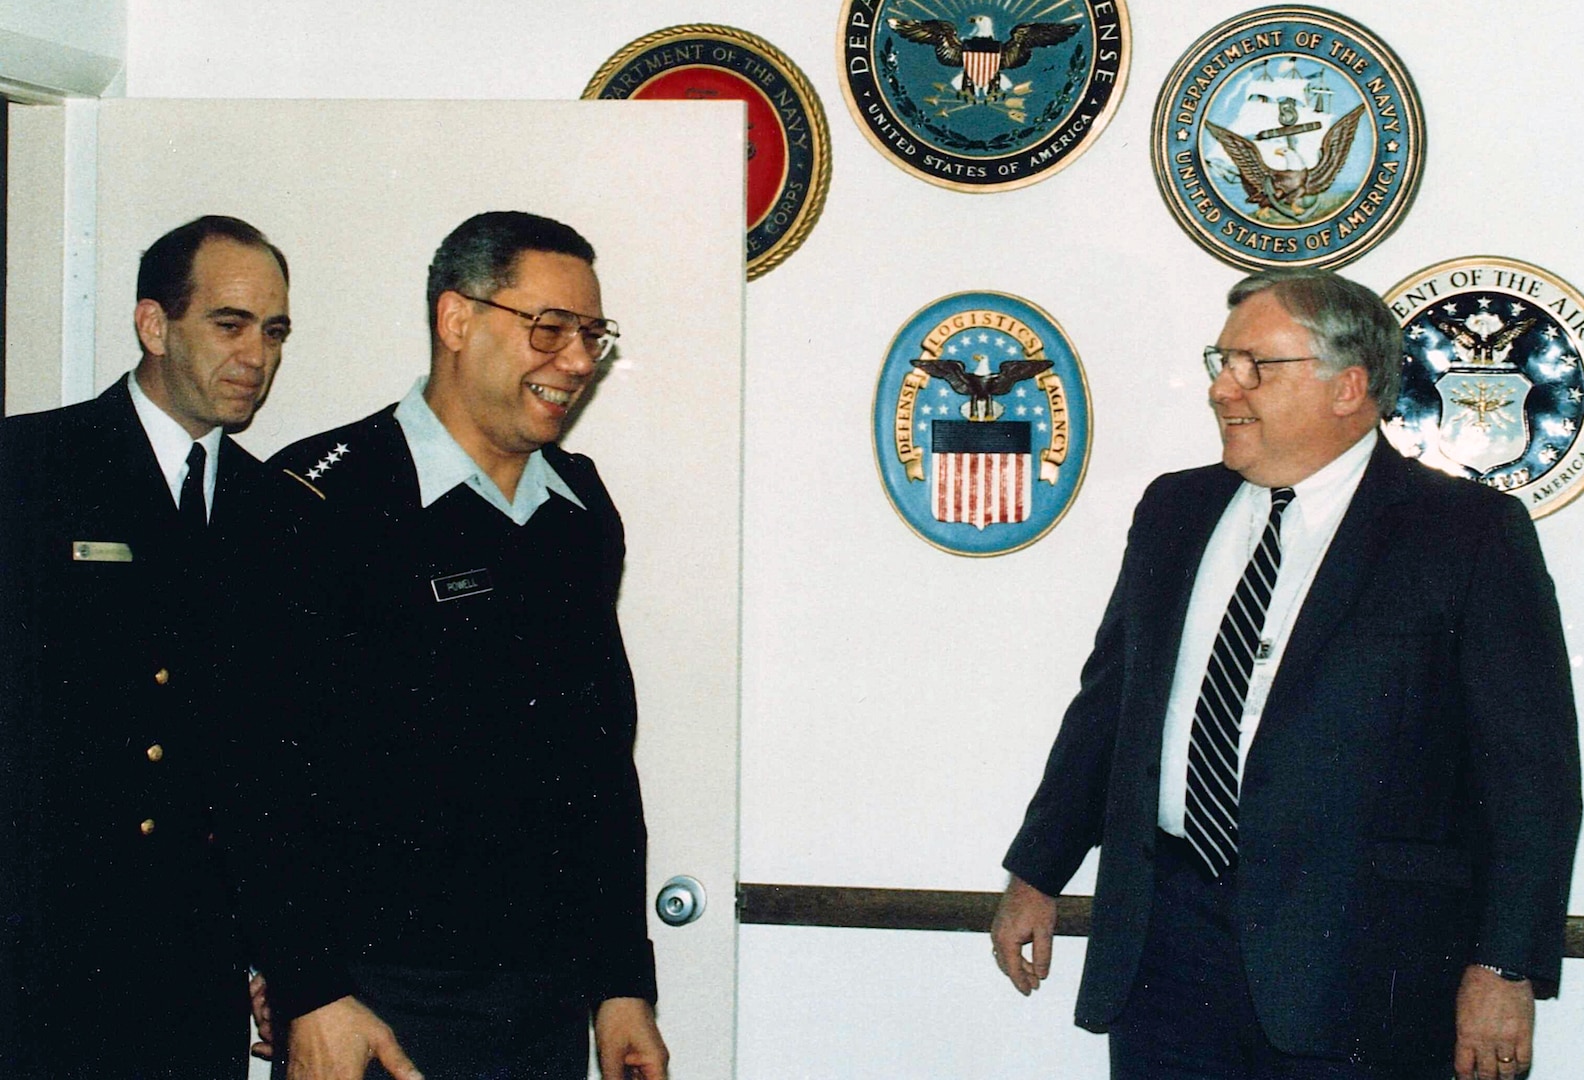 Male Navy Admiral and Army Gen. Colin Powell visit a civilian man during a 1991 visit to Cameron Station, Virginia.